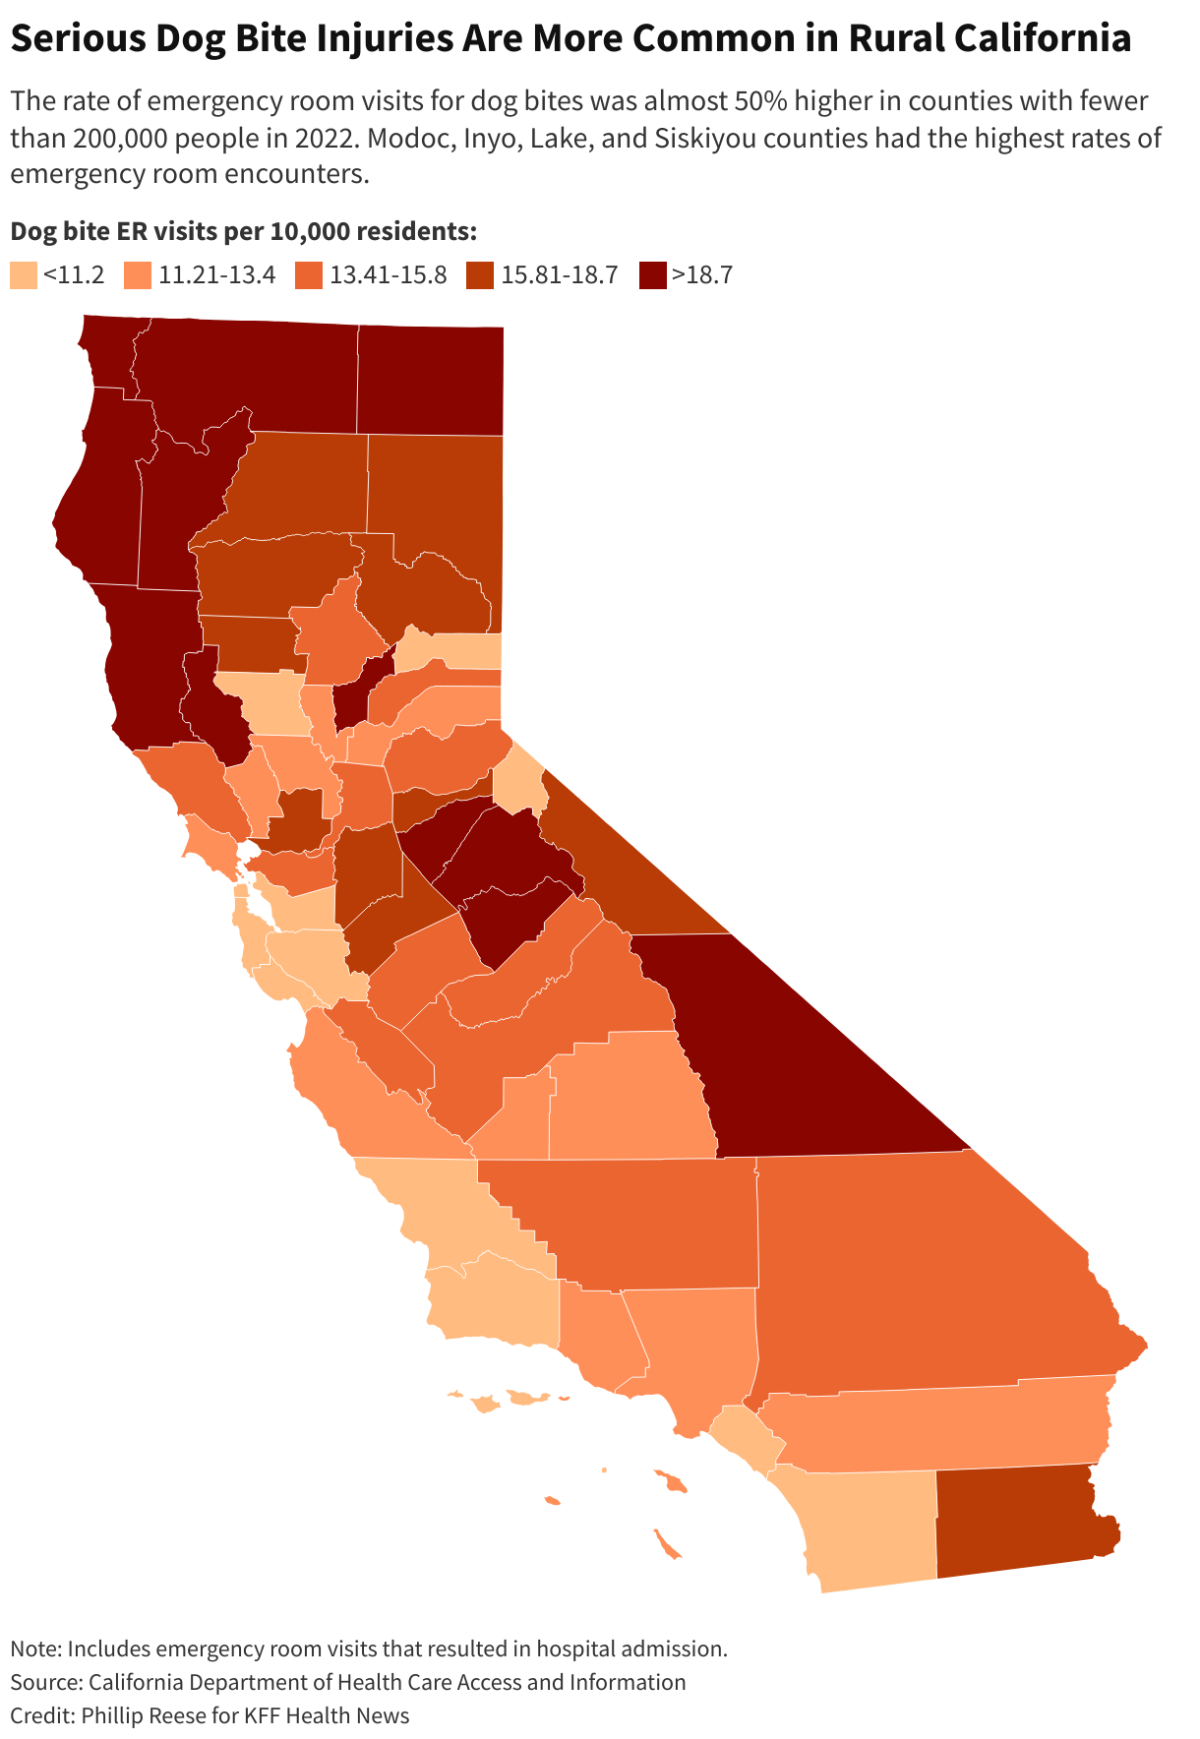 A map showing the rate of dog bite emergency visits in California counties.